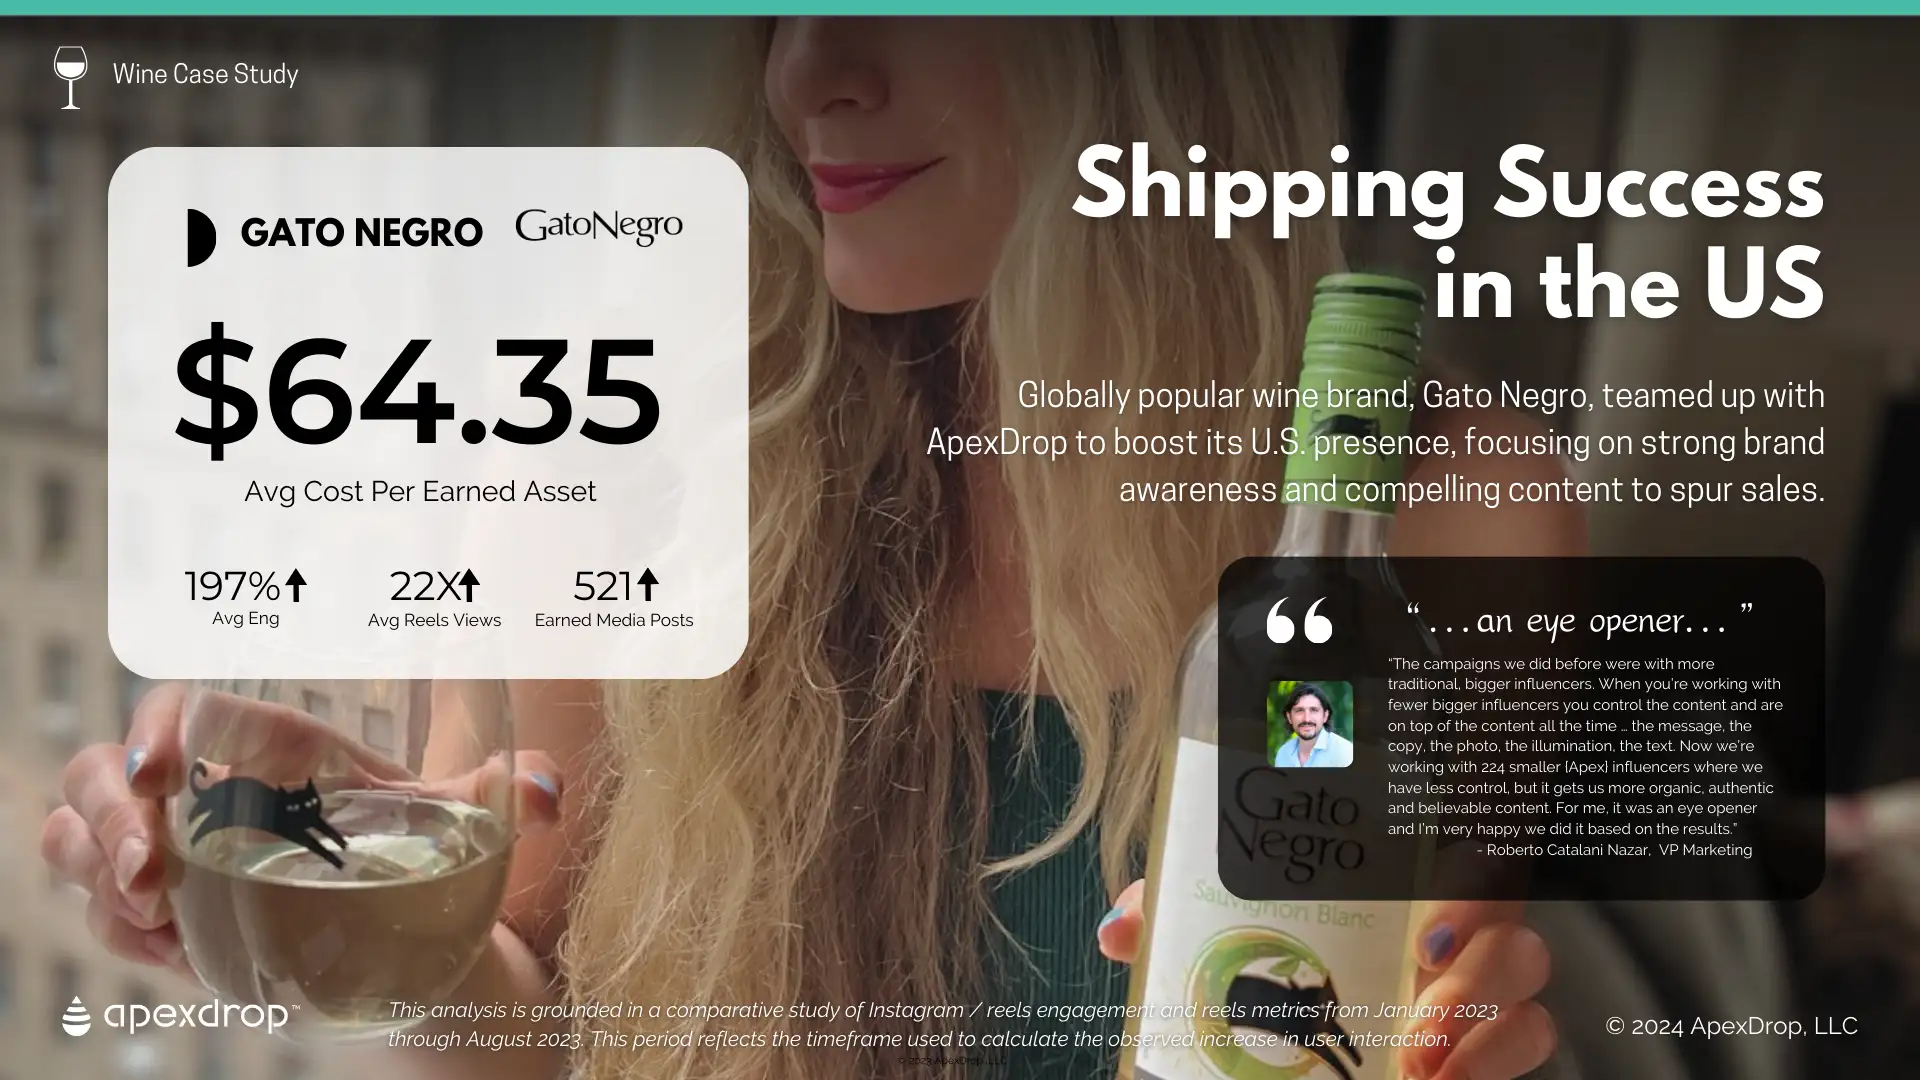 Shipping Success in the US - Globally popular wine brand, Gato Negro, teamed up with ApexDrop to boost its U.S. presence, focusing on strong brand awareness and compelling content to spur sales.